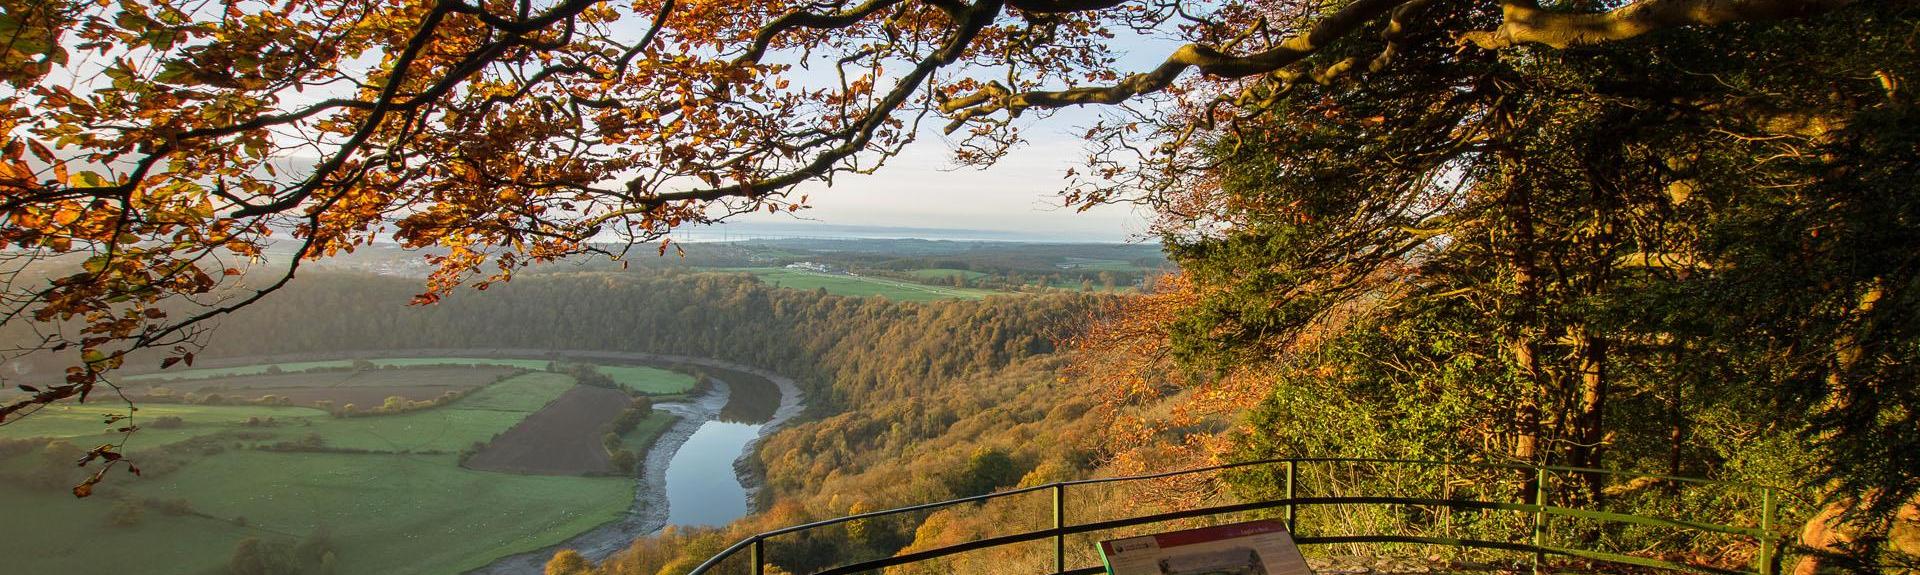 An autumnal view of the Wye Valley